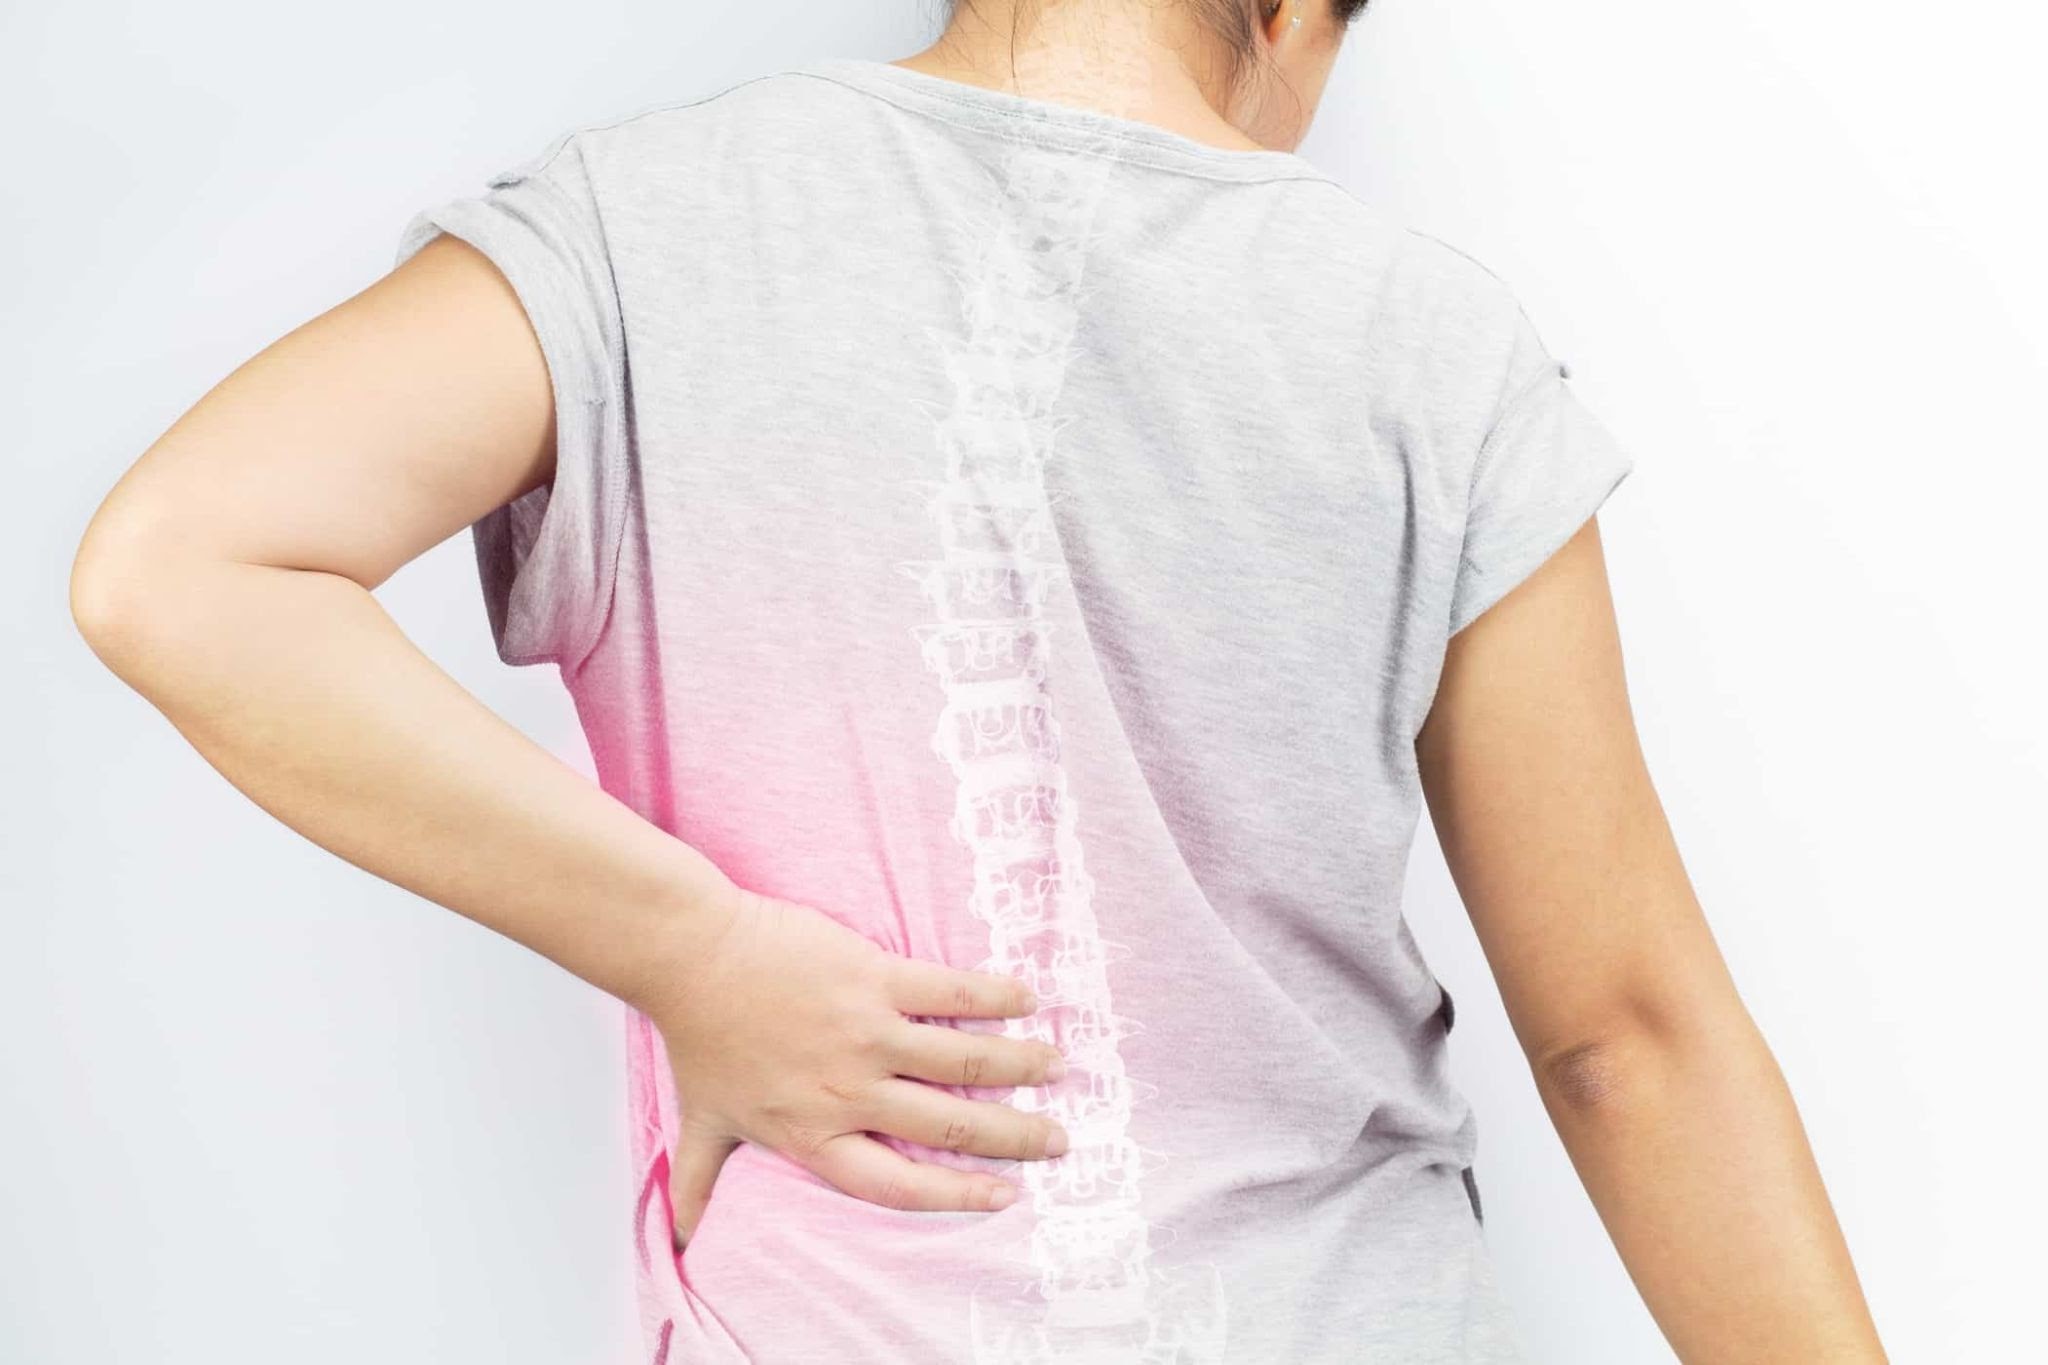 Top 5 Benefits of Spinal Cord Stimulation for Chronic Pain Management